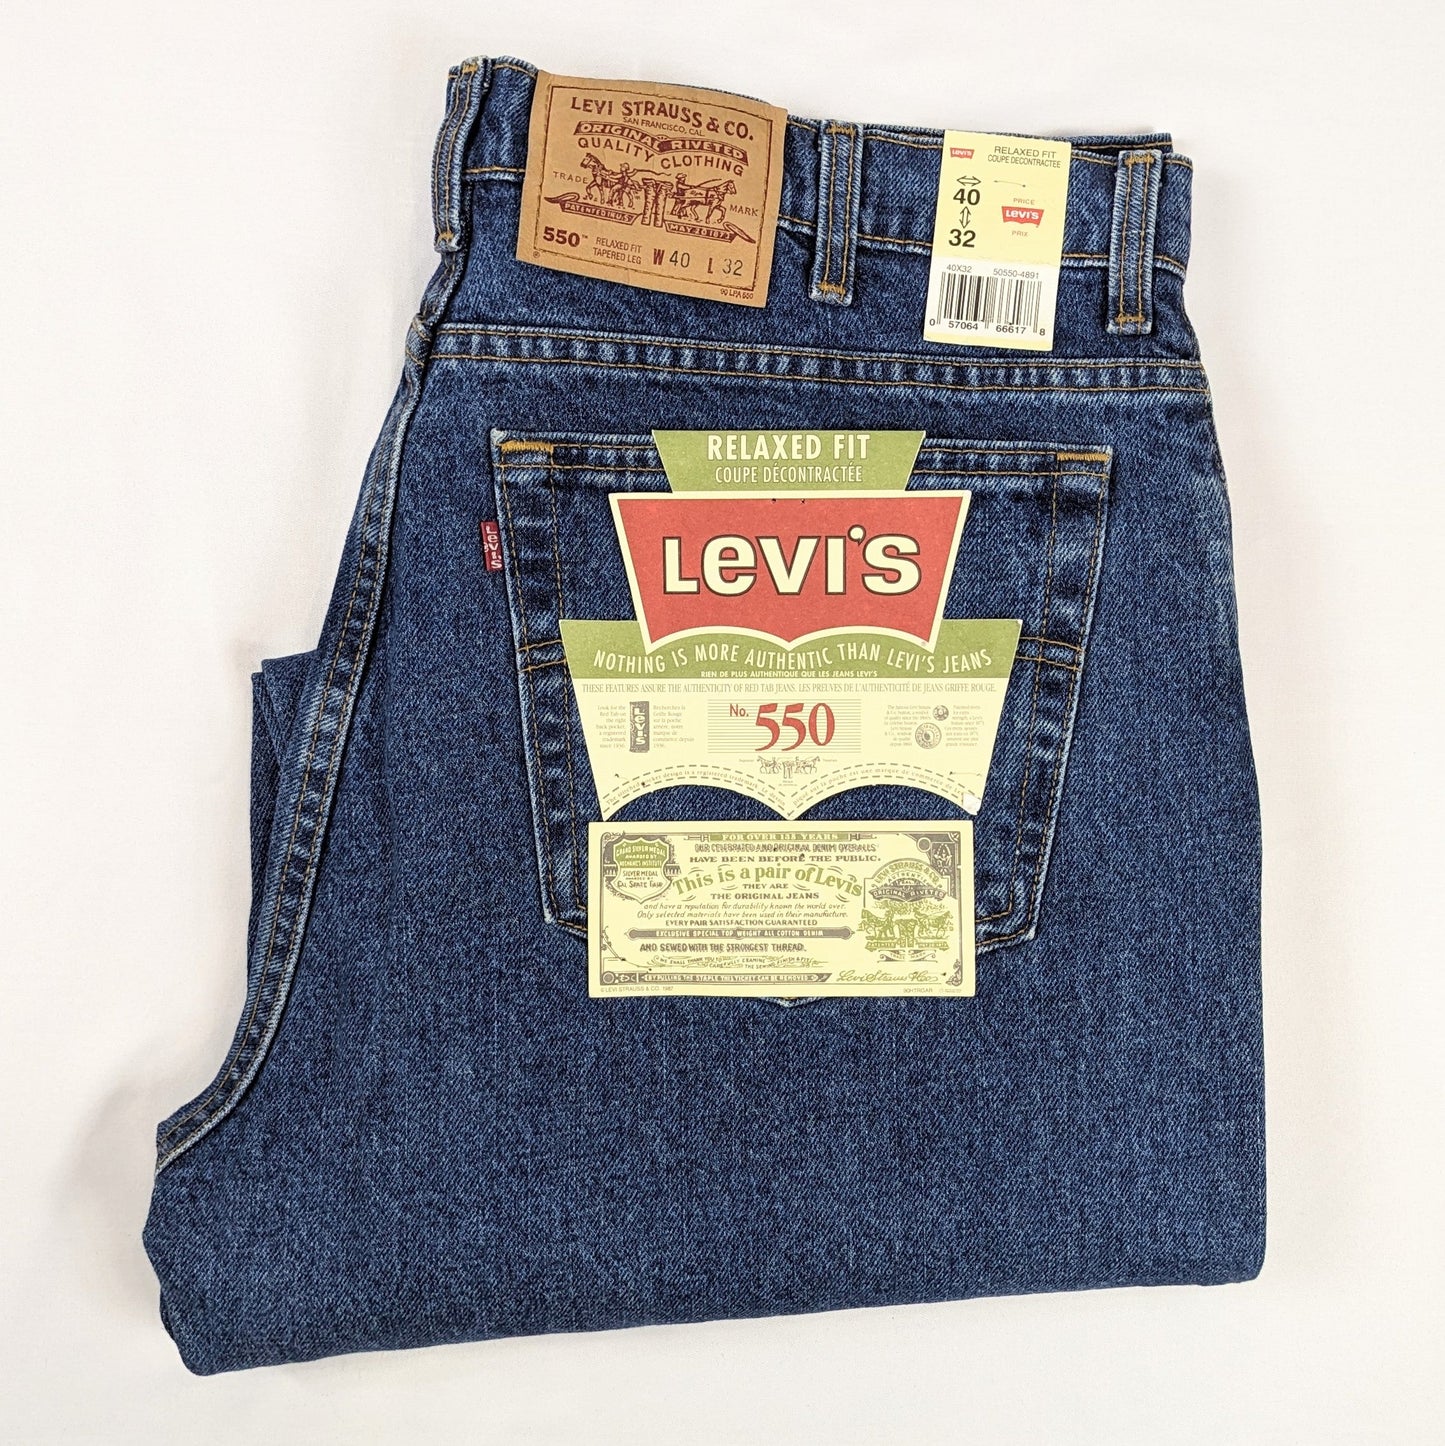 Levis jeans 550 relaxed fit vintage 1990s deadstock made in Canada